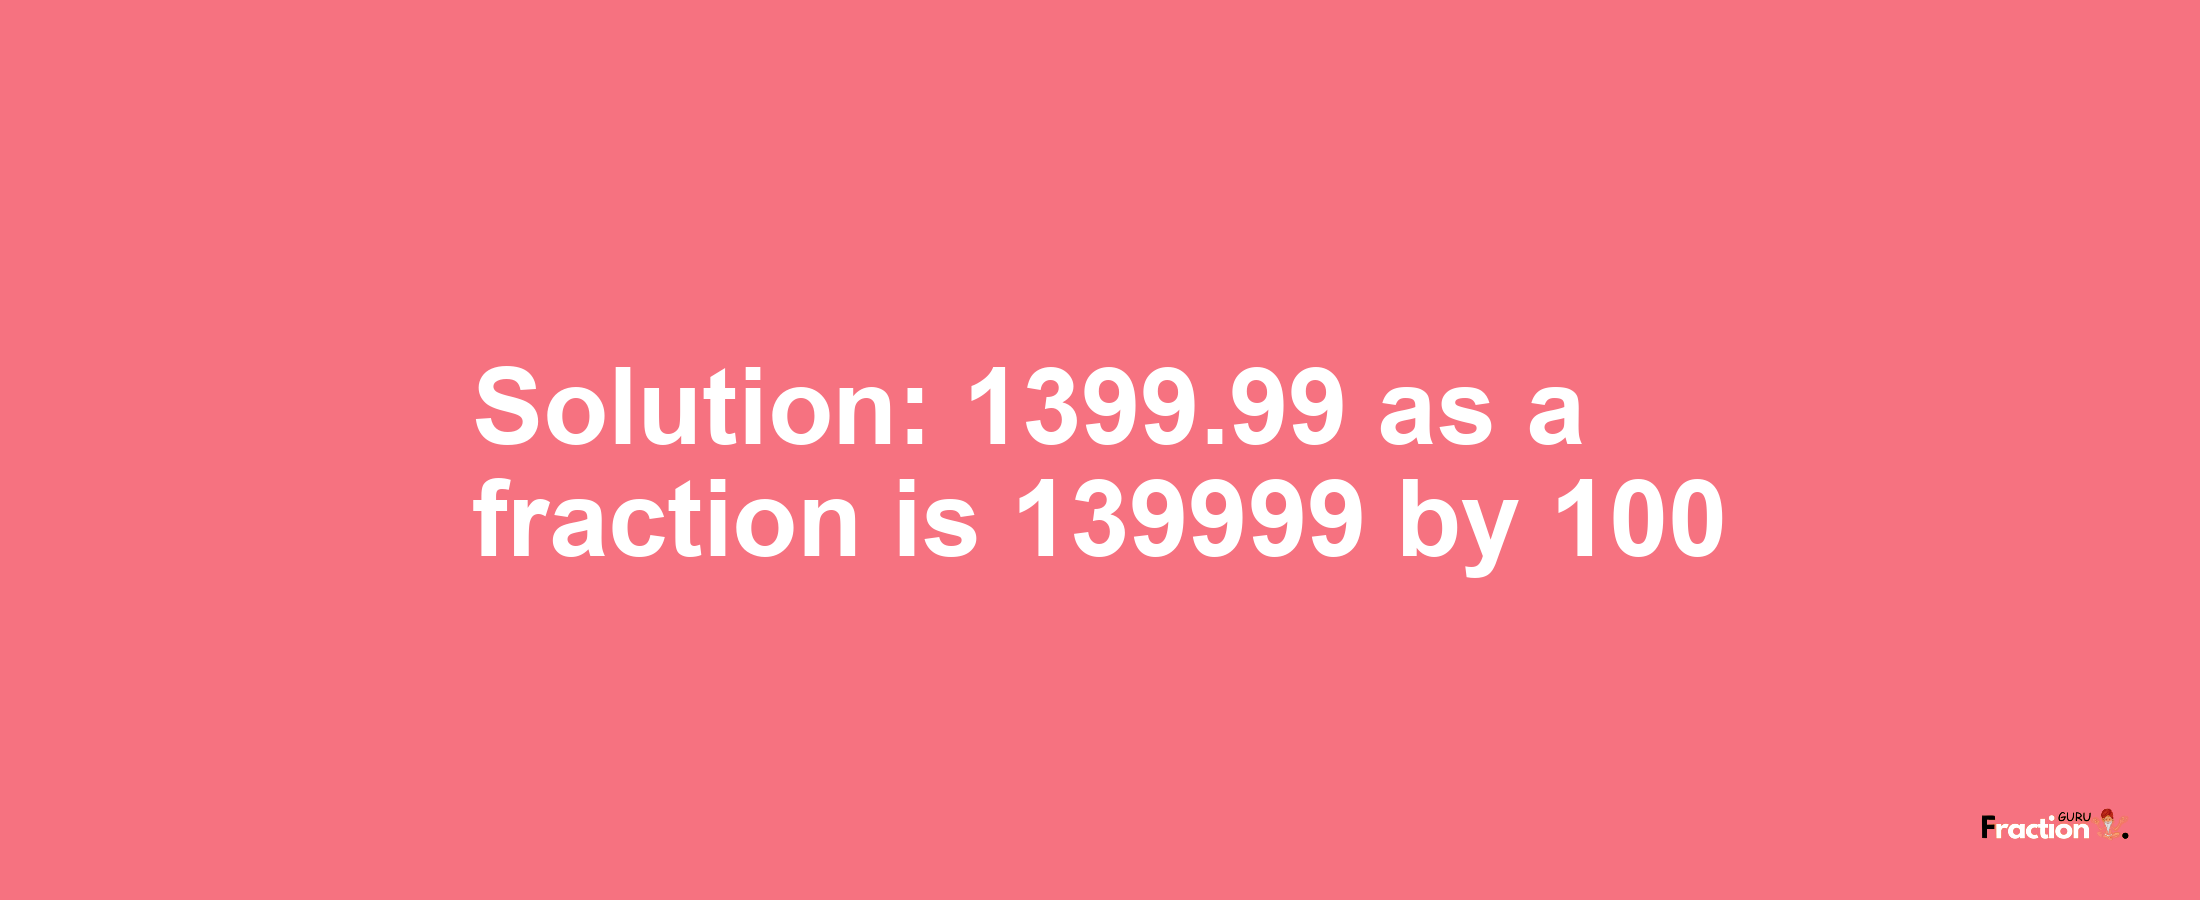 Solution:1399.99 as a fraction is 139999/100